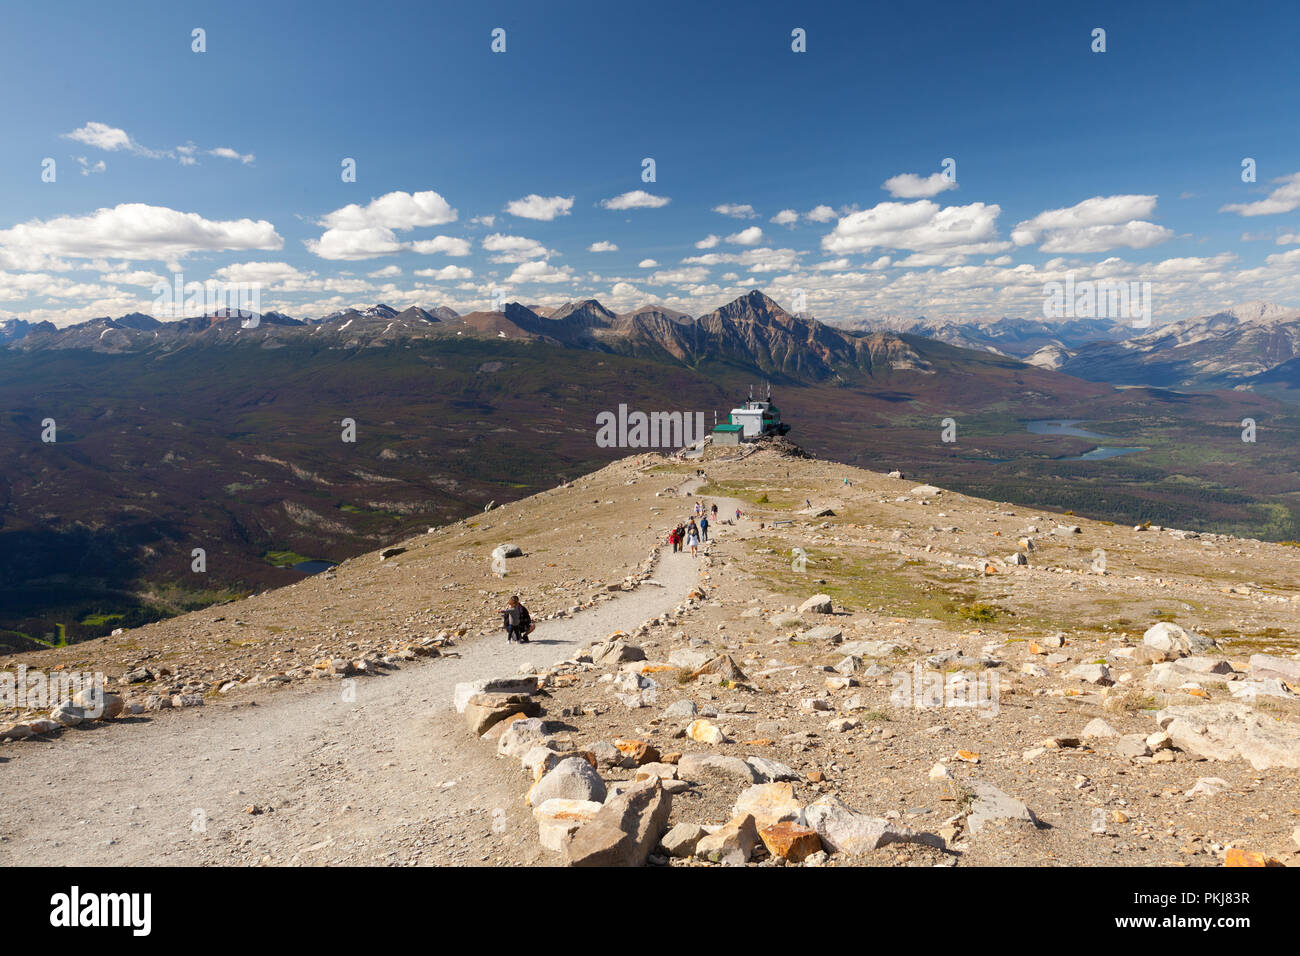 Overlooking the town of Jasper Alberta Canada from tram Stock Photo